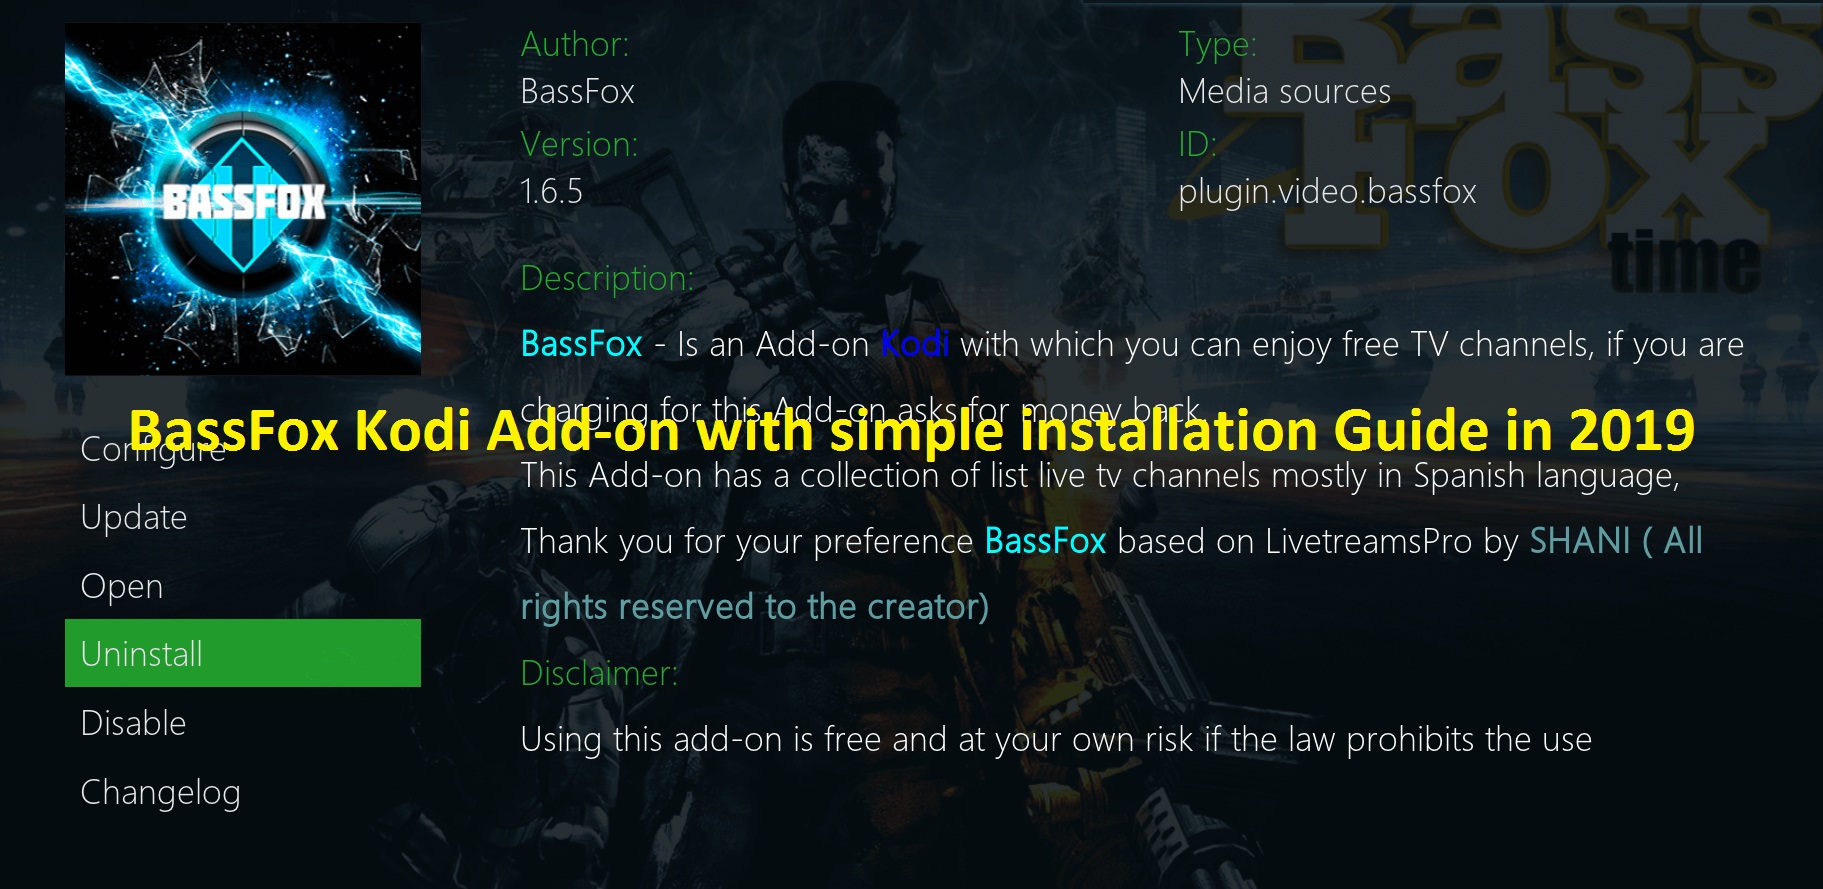 BassFox Kodi Add-on with simple installation Guide in 2020